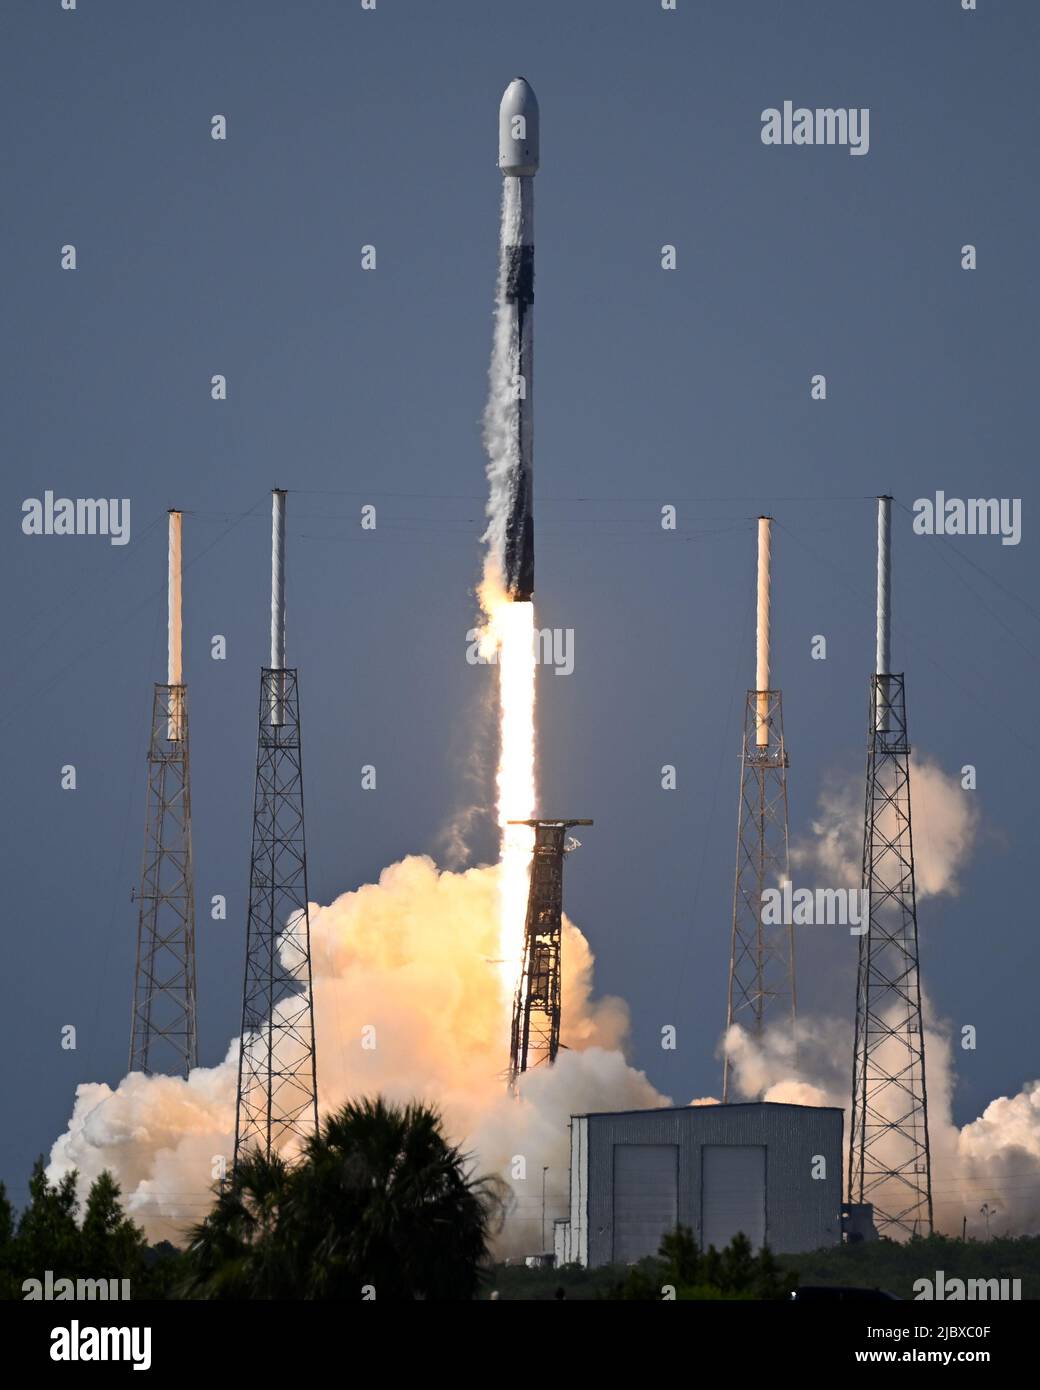 Florida, US, June 08, 2022. A SpaceX Falcon 9 rocket launches the Nilesat 301 communications satellite from Complex 40 at the Cape Canaveral Space Force Station, Florida on Wednesday, June 08, 2022. The satellite will provide television and internet services to Egypt as well as other countries in the Middle East. Photo by Joe Marino/UPI Credit: UPI/Alamy Live News Stock Photo